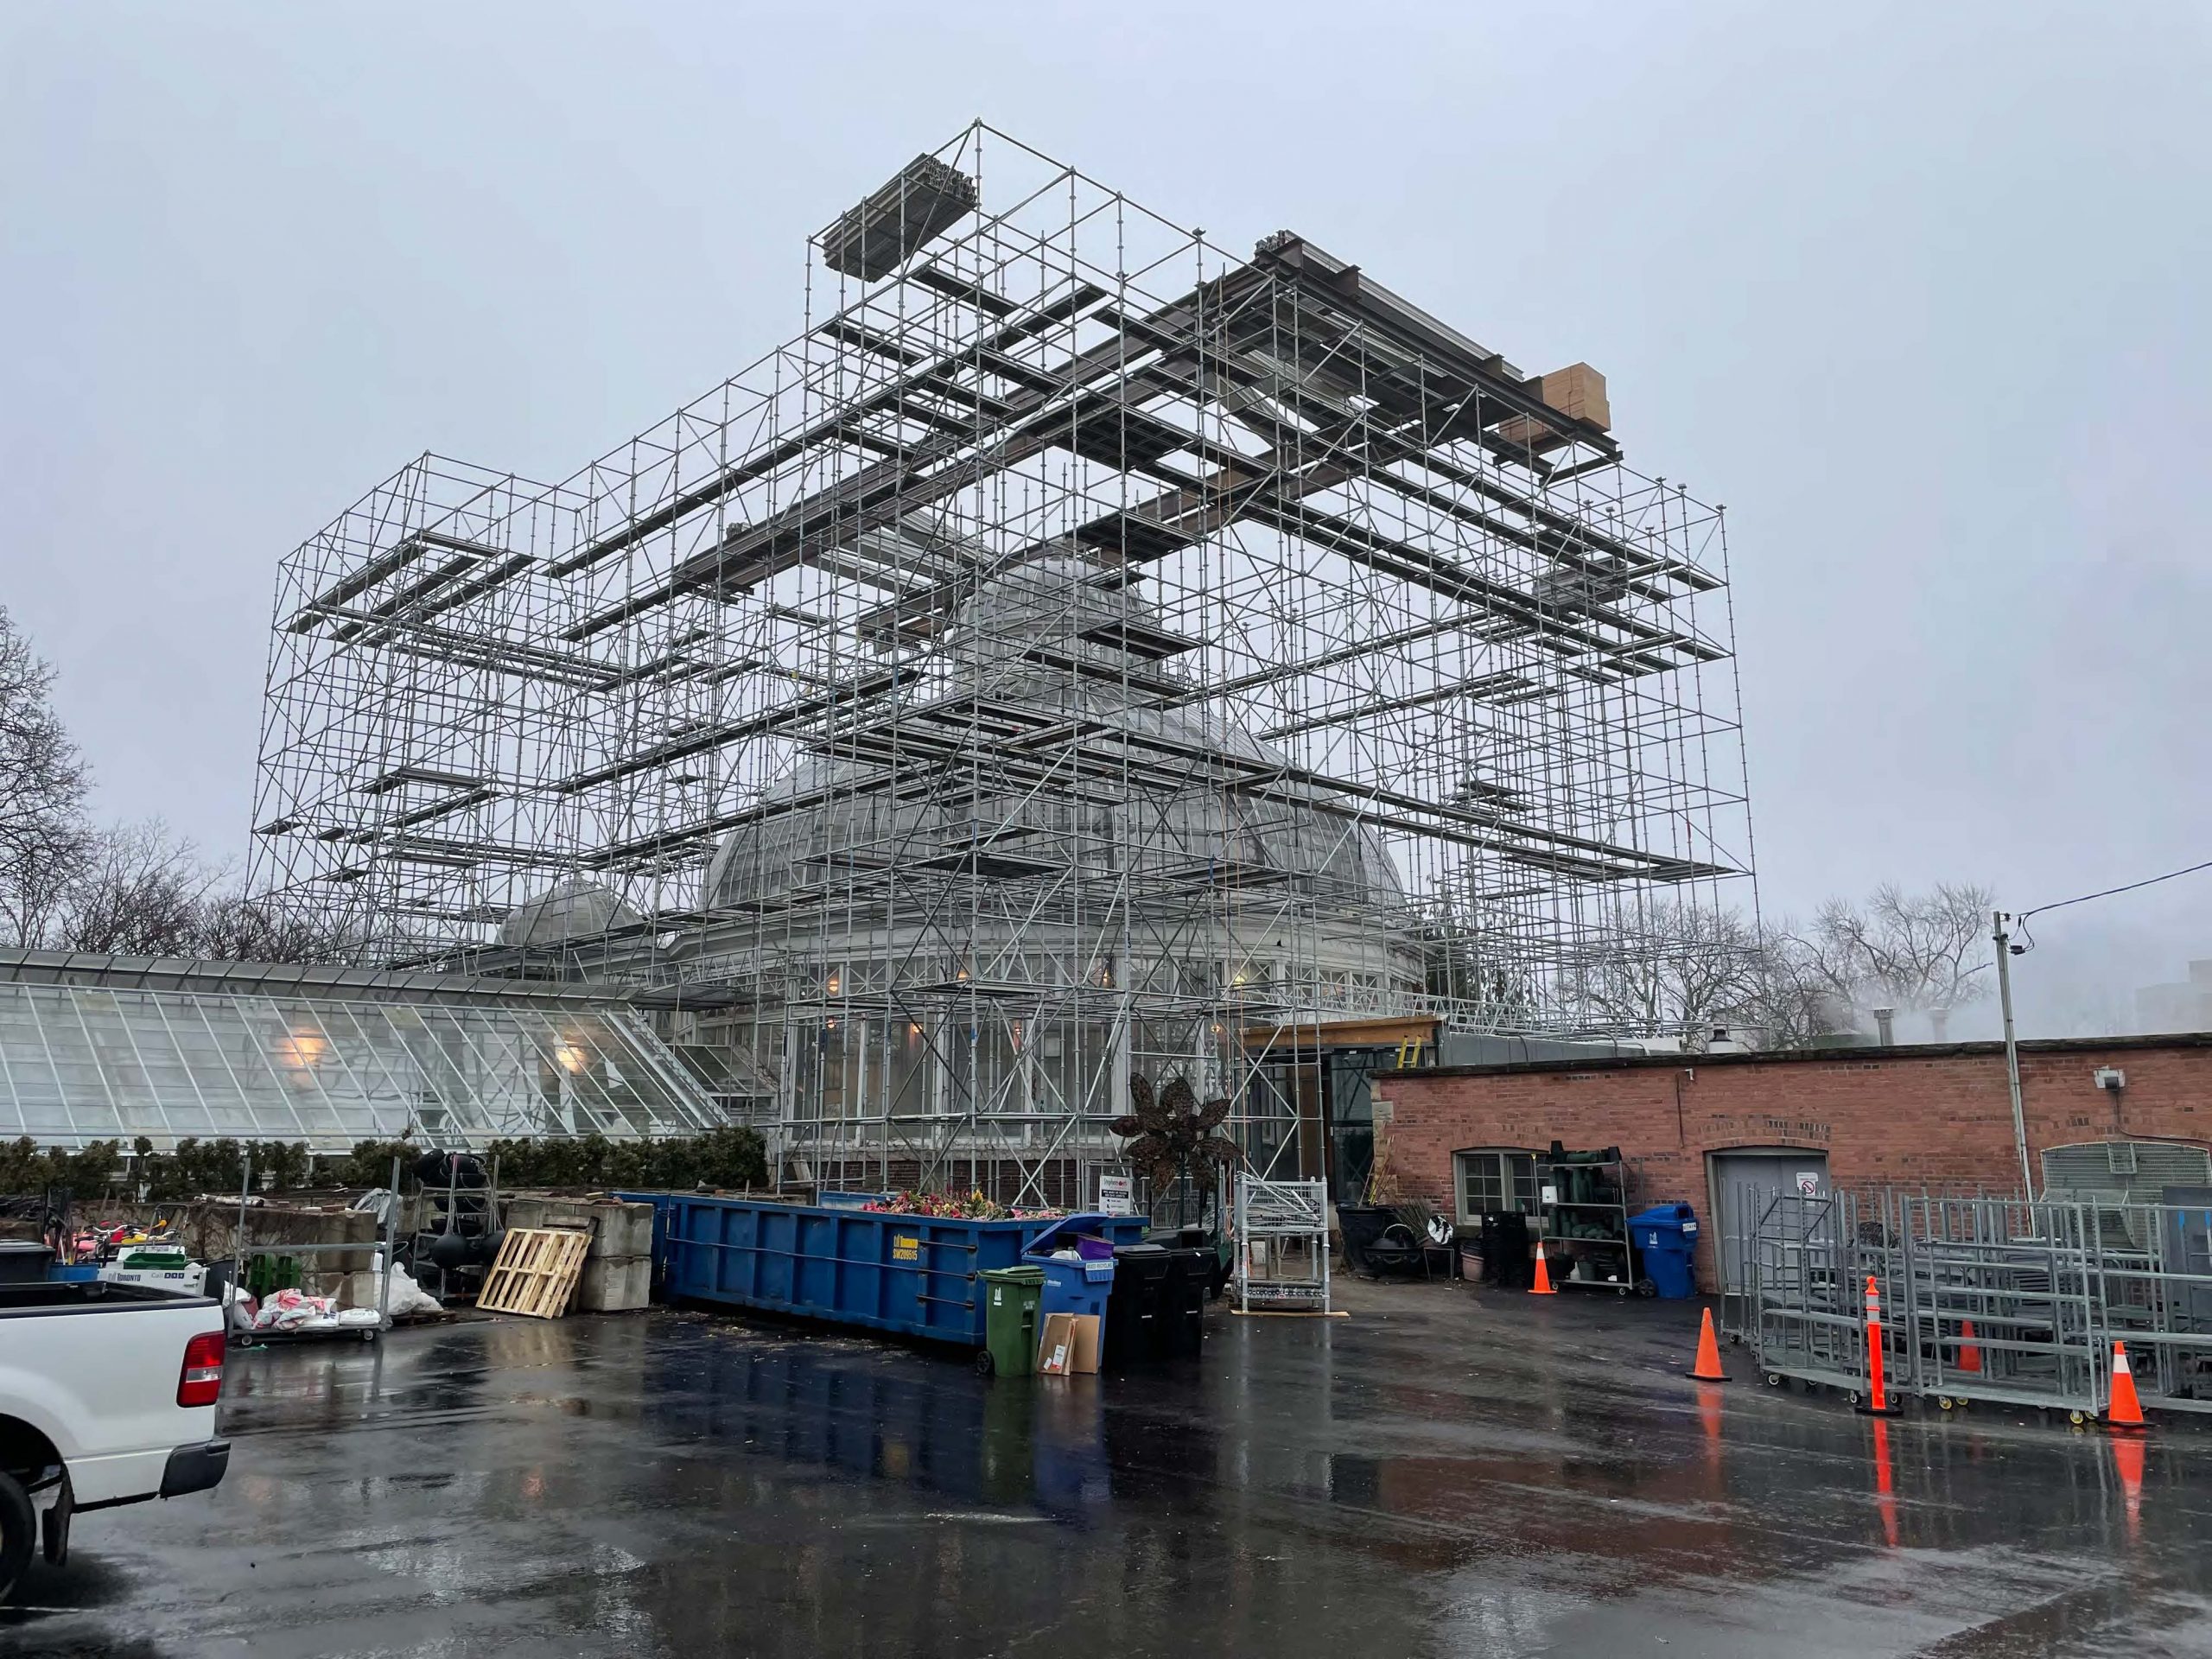 A photograph of the steel scaffolding structure at Allan Gardens Palm House which shows a tall framework structure with platforms and steel beams. 